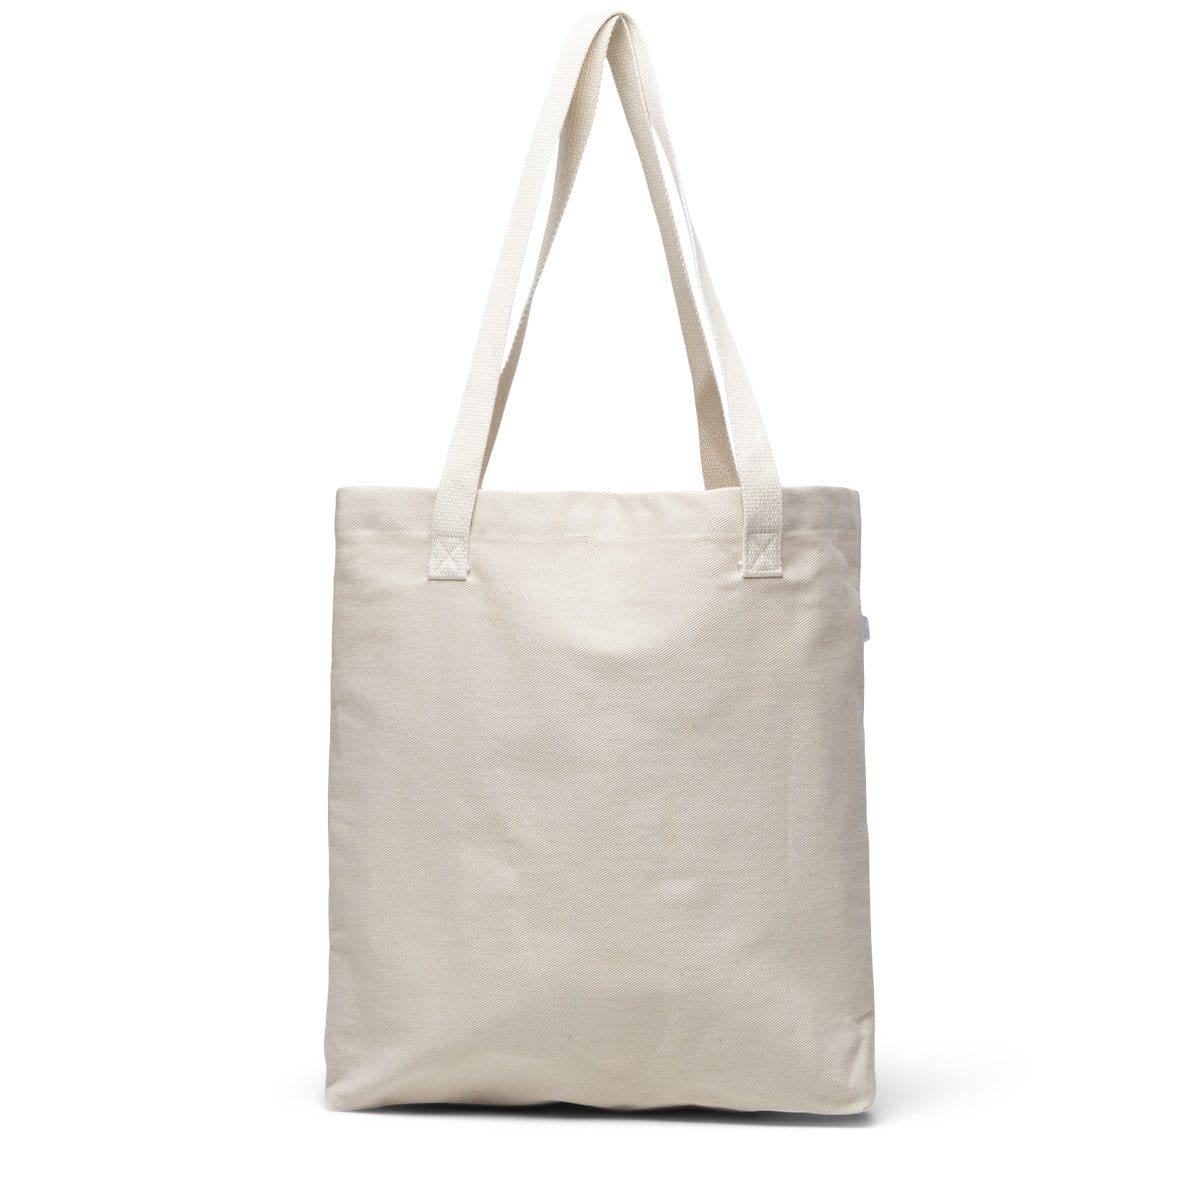 Cold World Frozen Goods Bags NATURAL / O/S CRYSTALS & LEVITATION TOTE